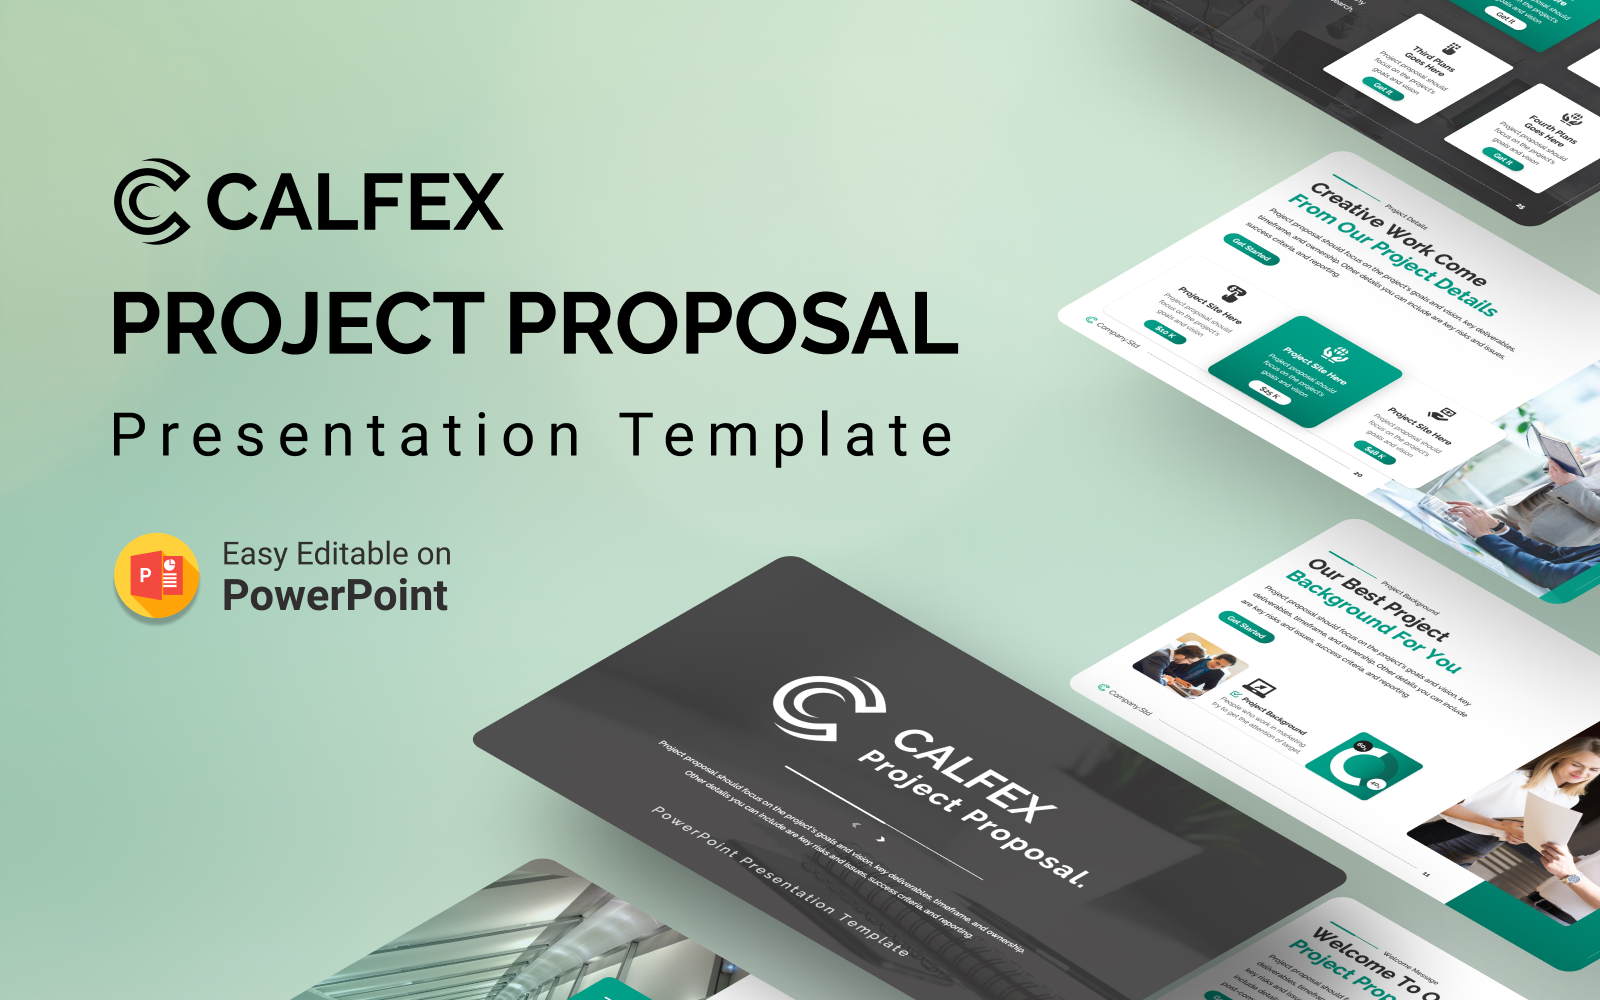 Calfex – Project Proposal PowerPoint Presentation Template